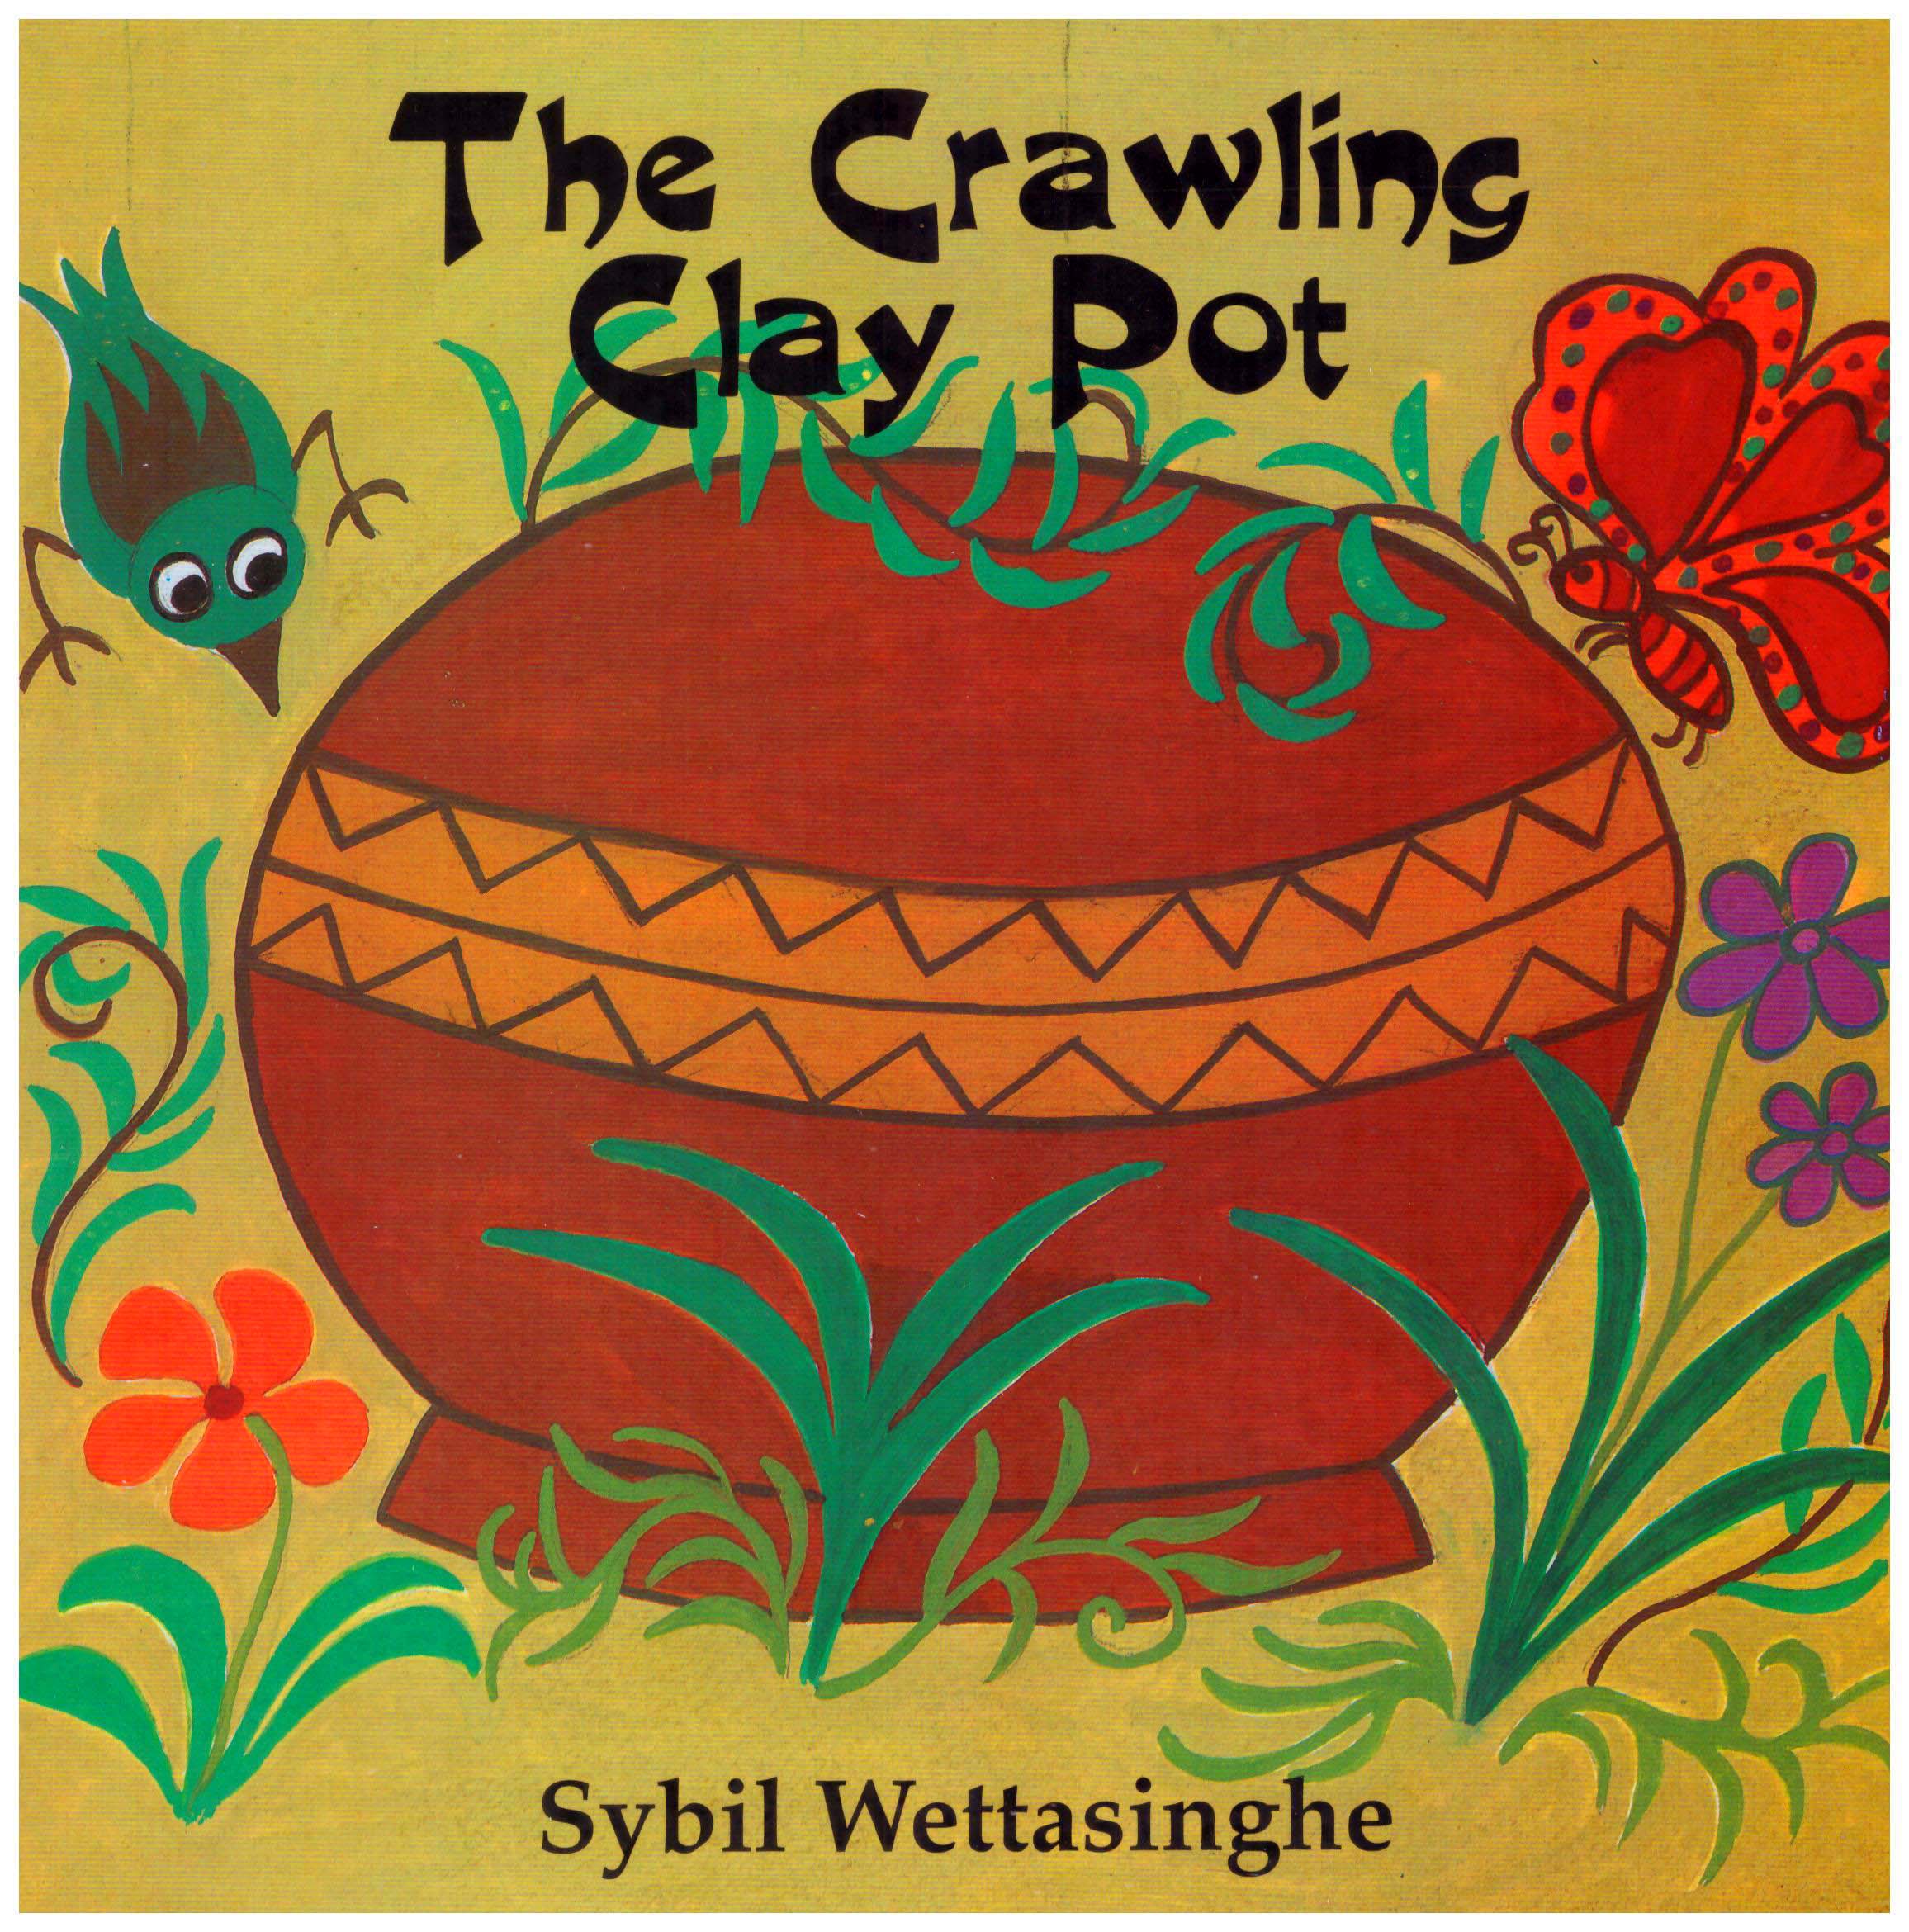 The Crawling Clay Pot